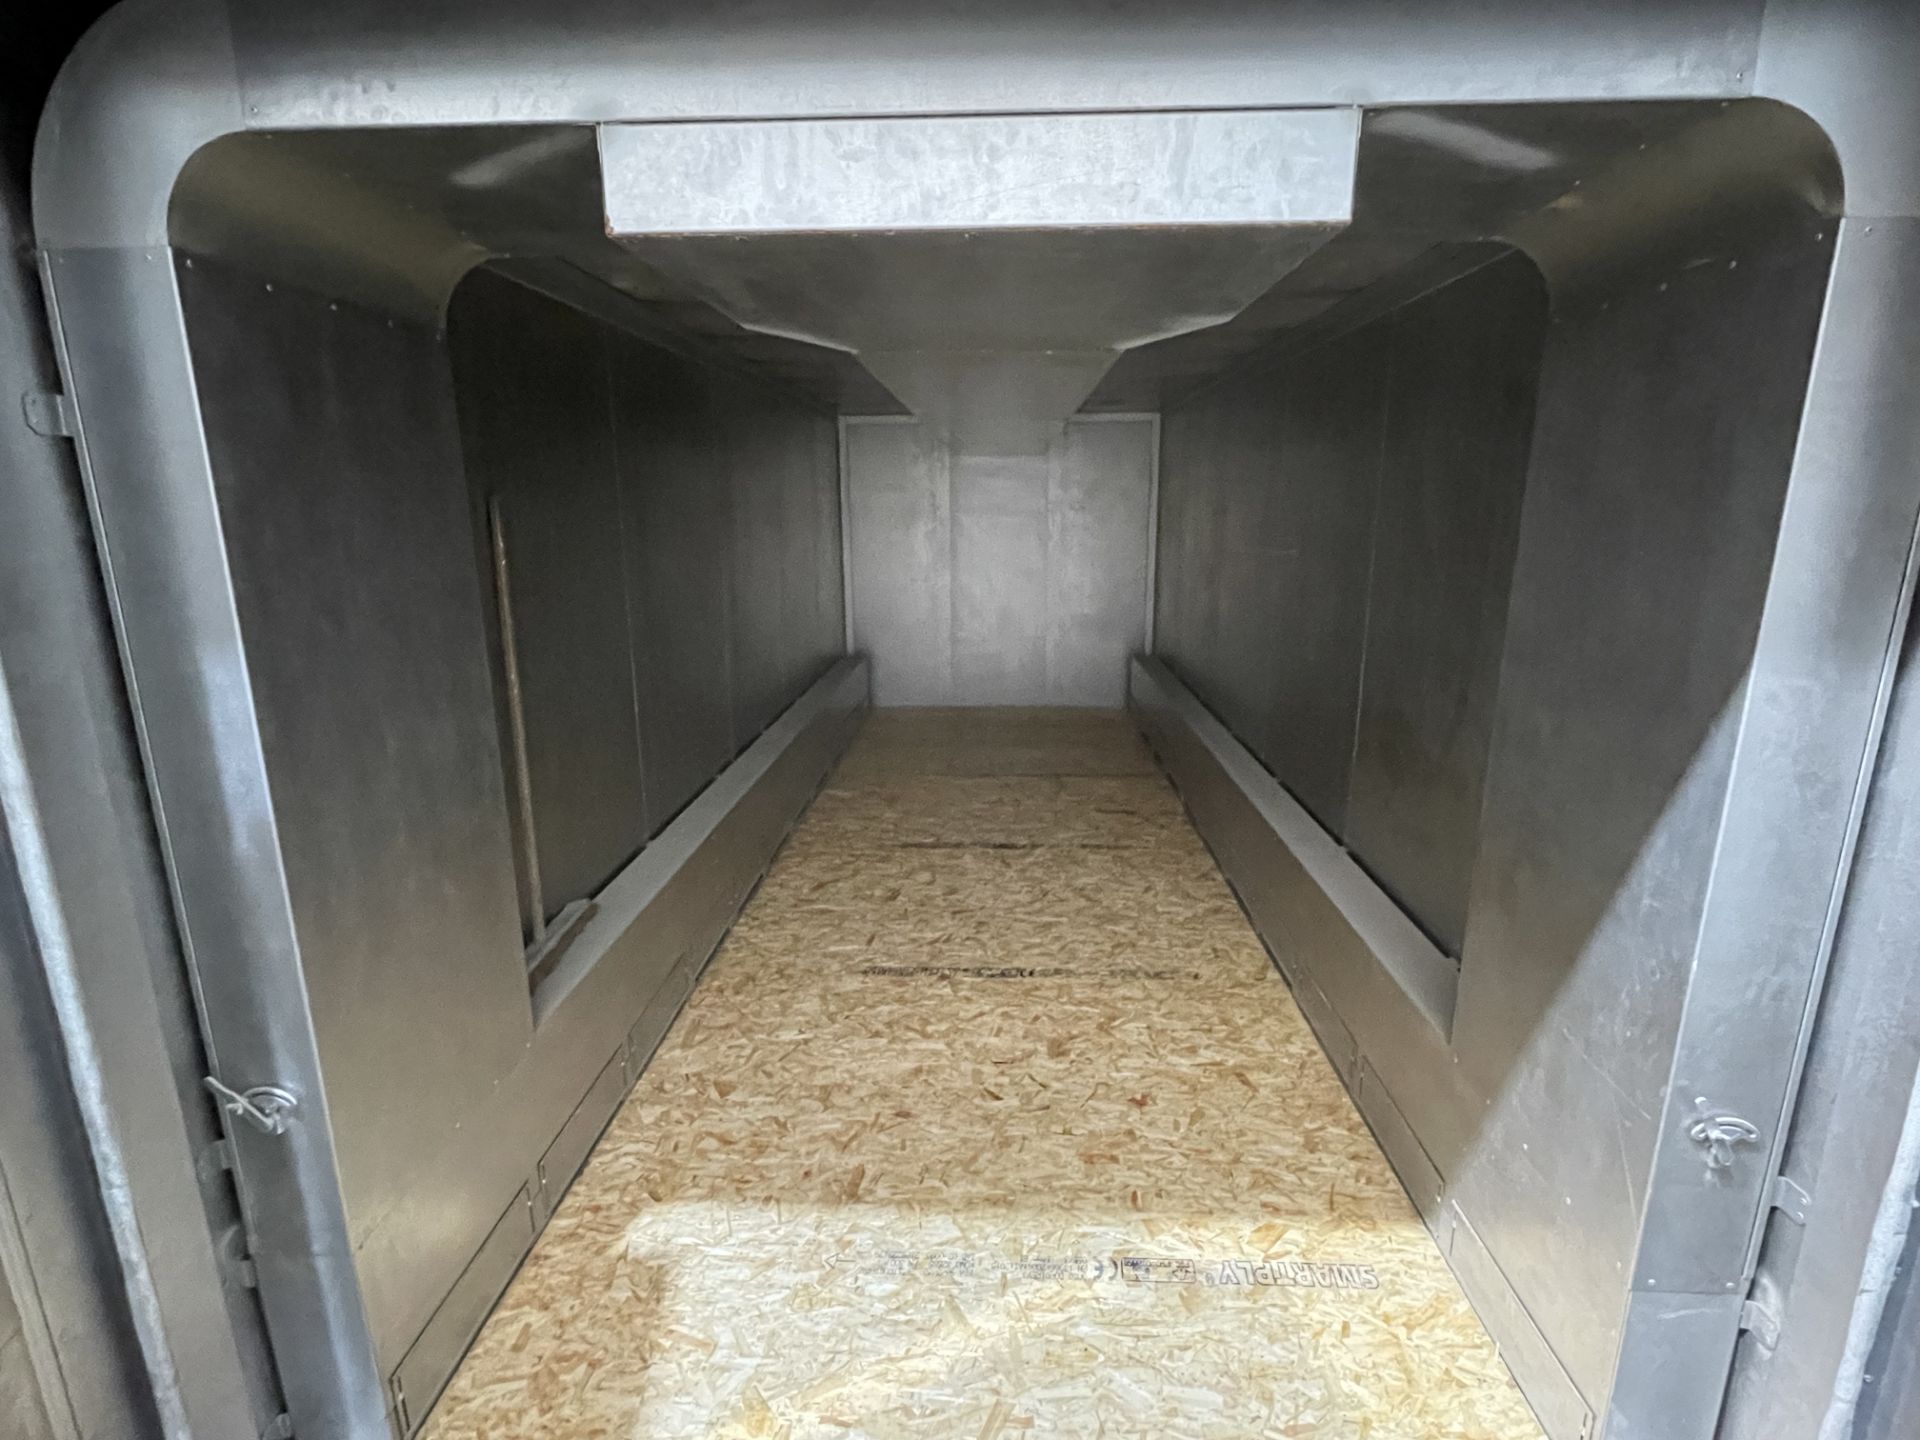 2017 Airflow Industrial Drying Oven, Measures 6200x2400X2300mm with 2016 Comtherm BK-O Natural Gas - Image 7 of 12